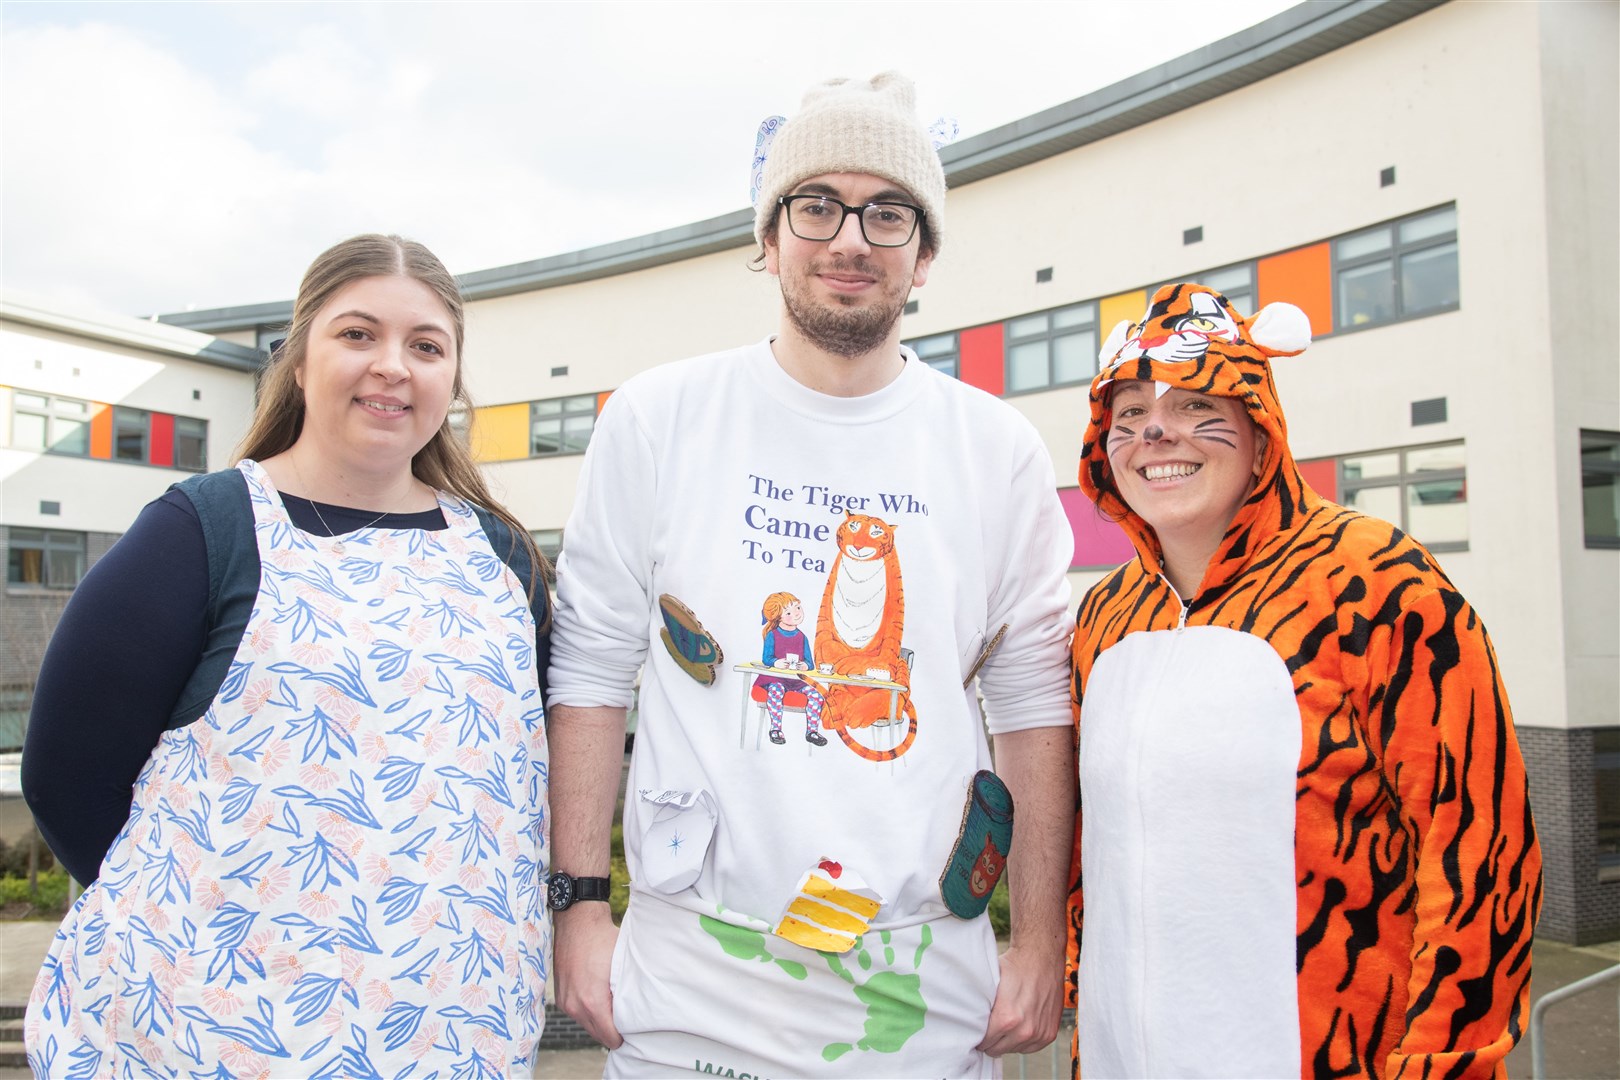 The Home Economics department came dressed as 'The Tiger Who Came to Tea'. Picture: Daniel Forsyth